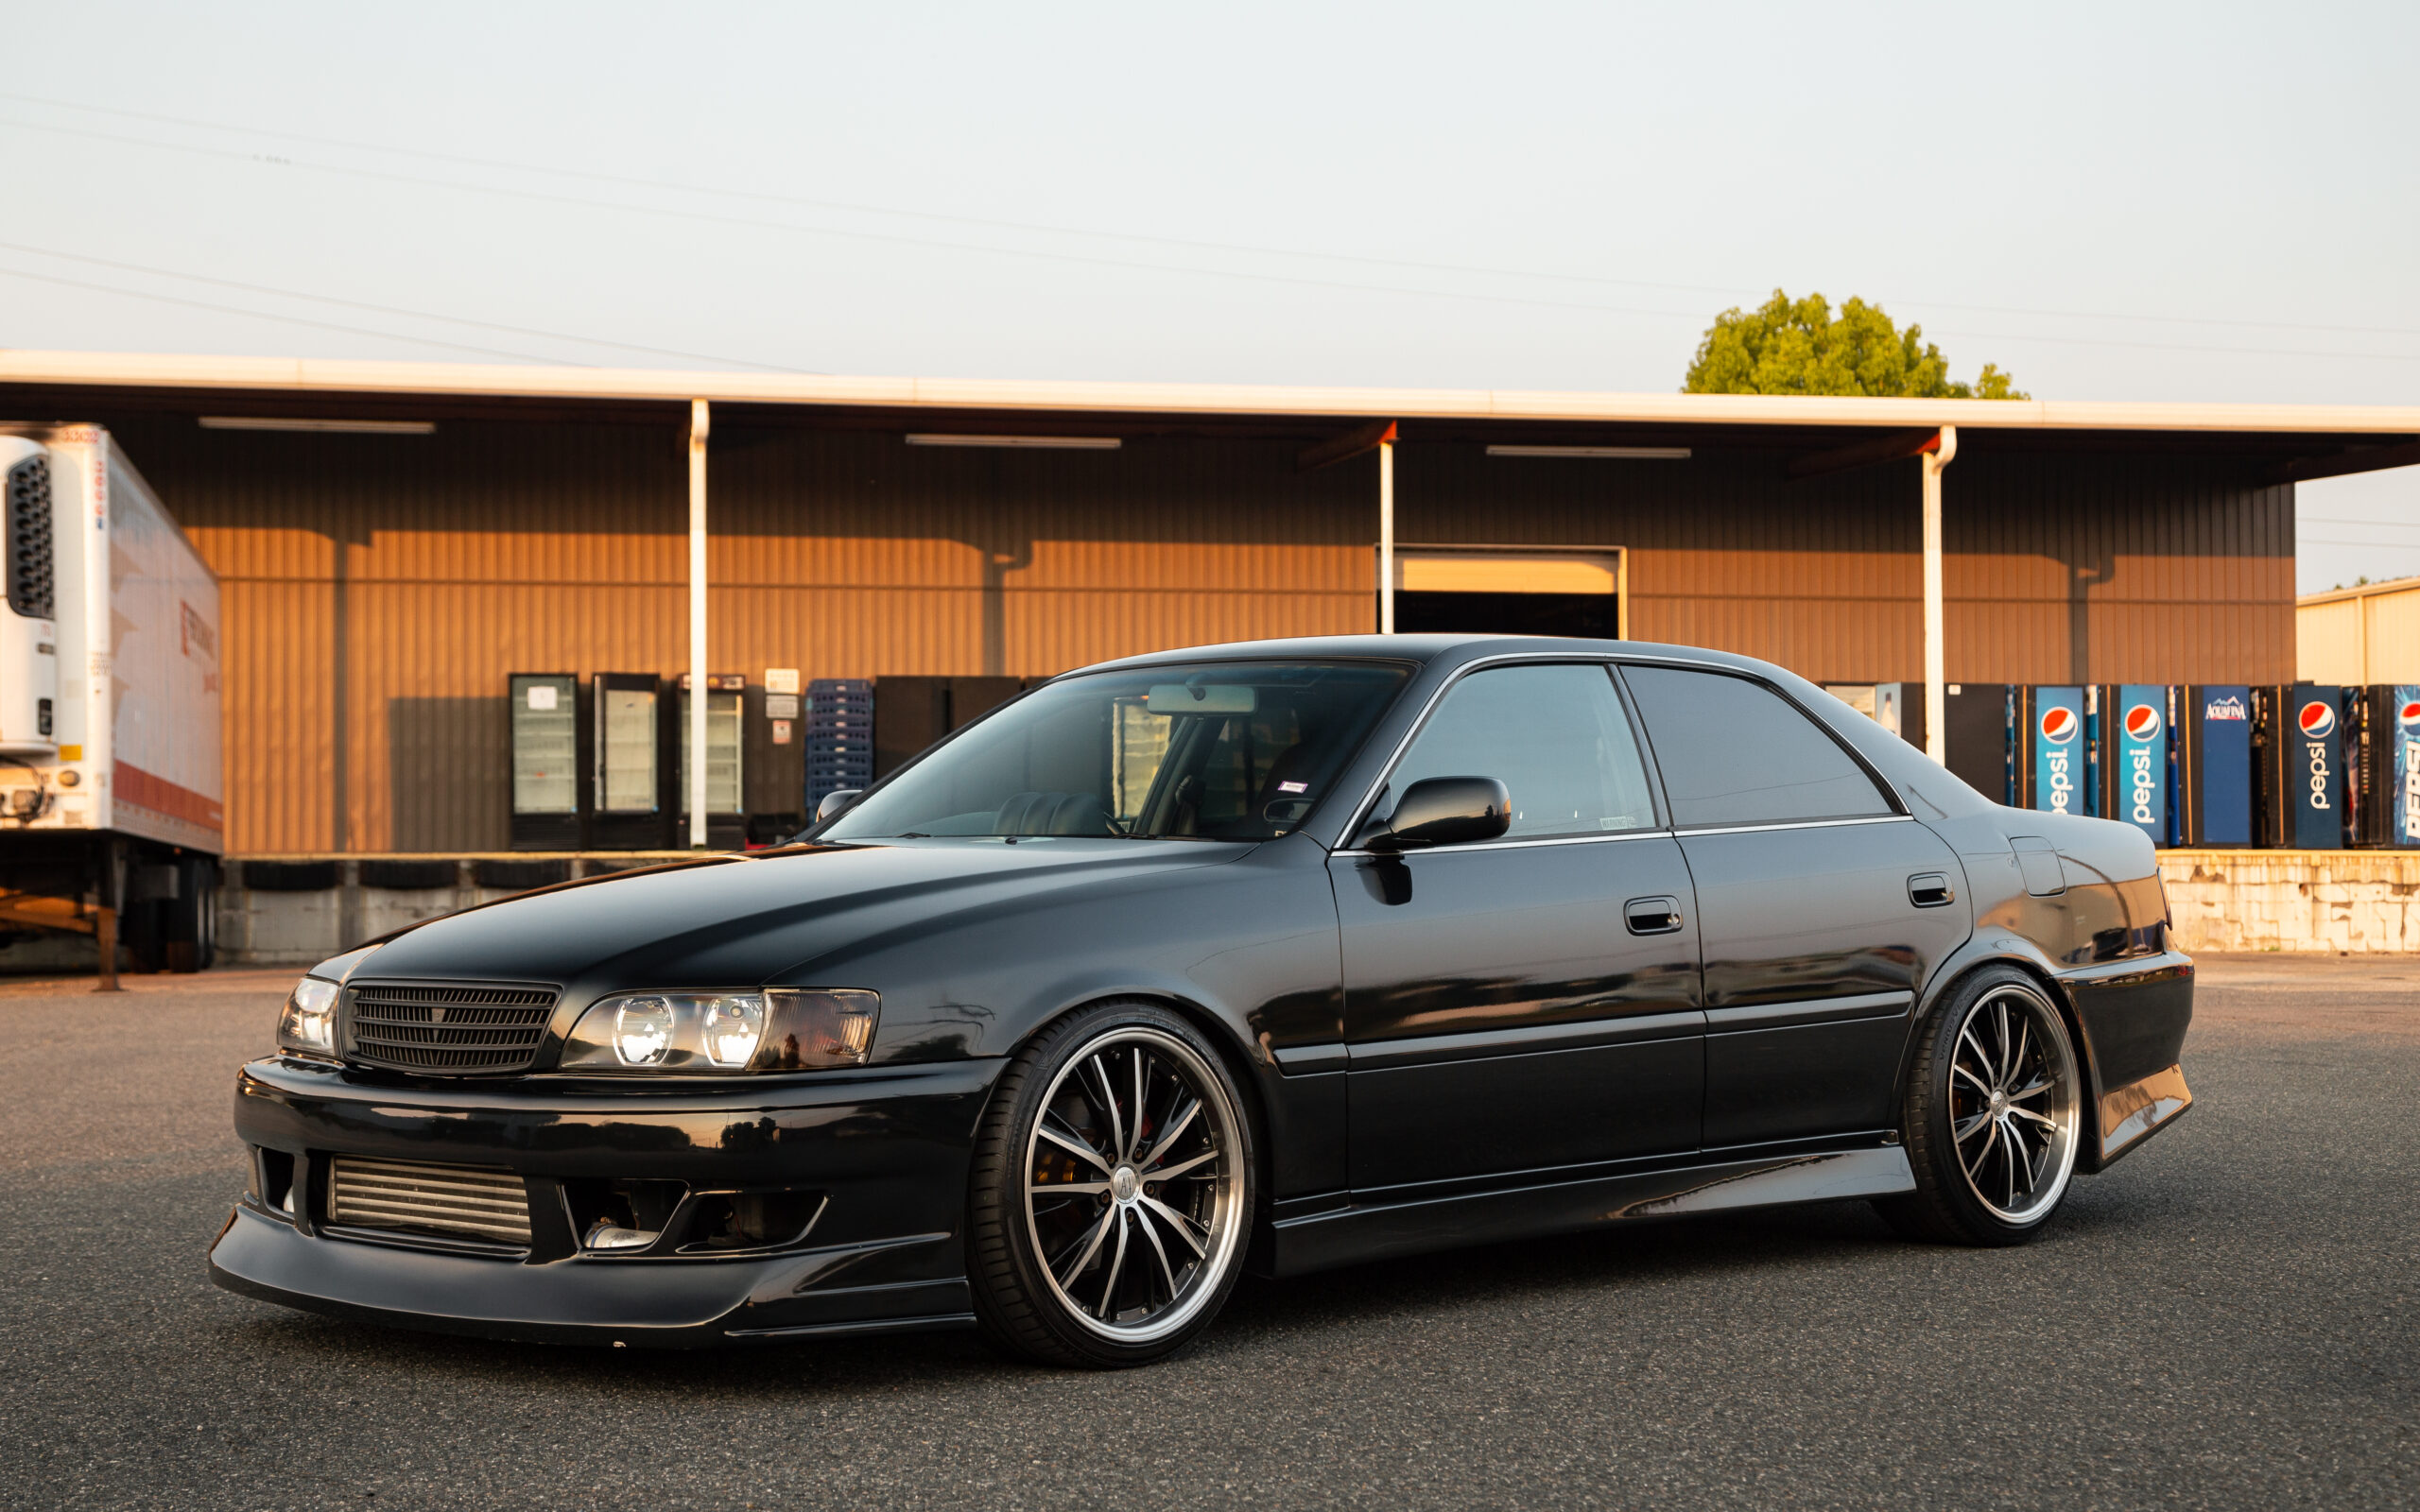 Toyota Chaser JZX100 Turbo 5 Speed RWD powered by 1JZ-GTE.